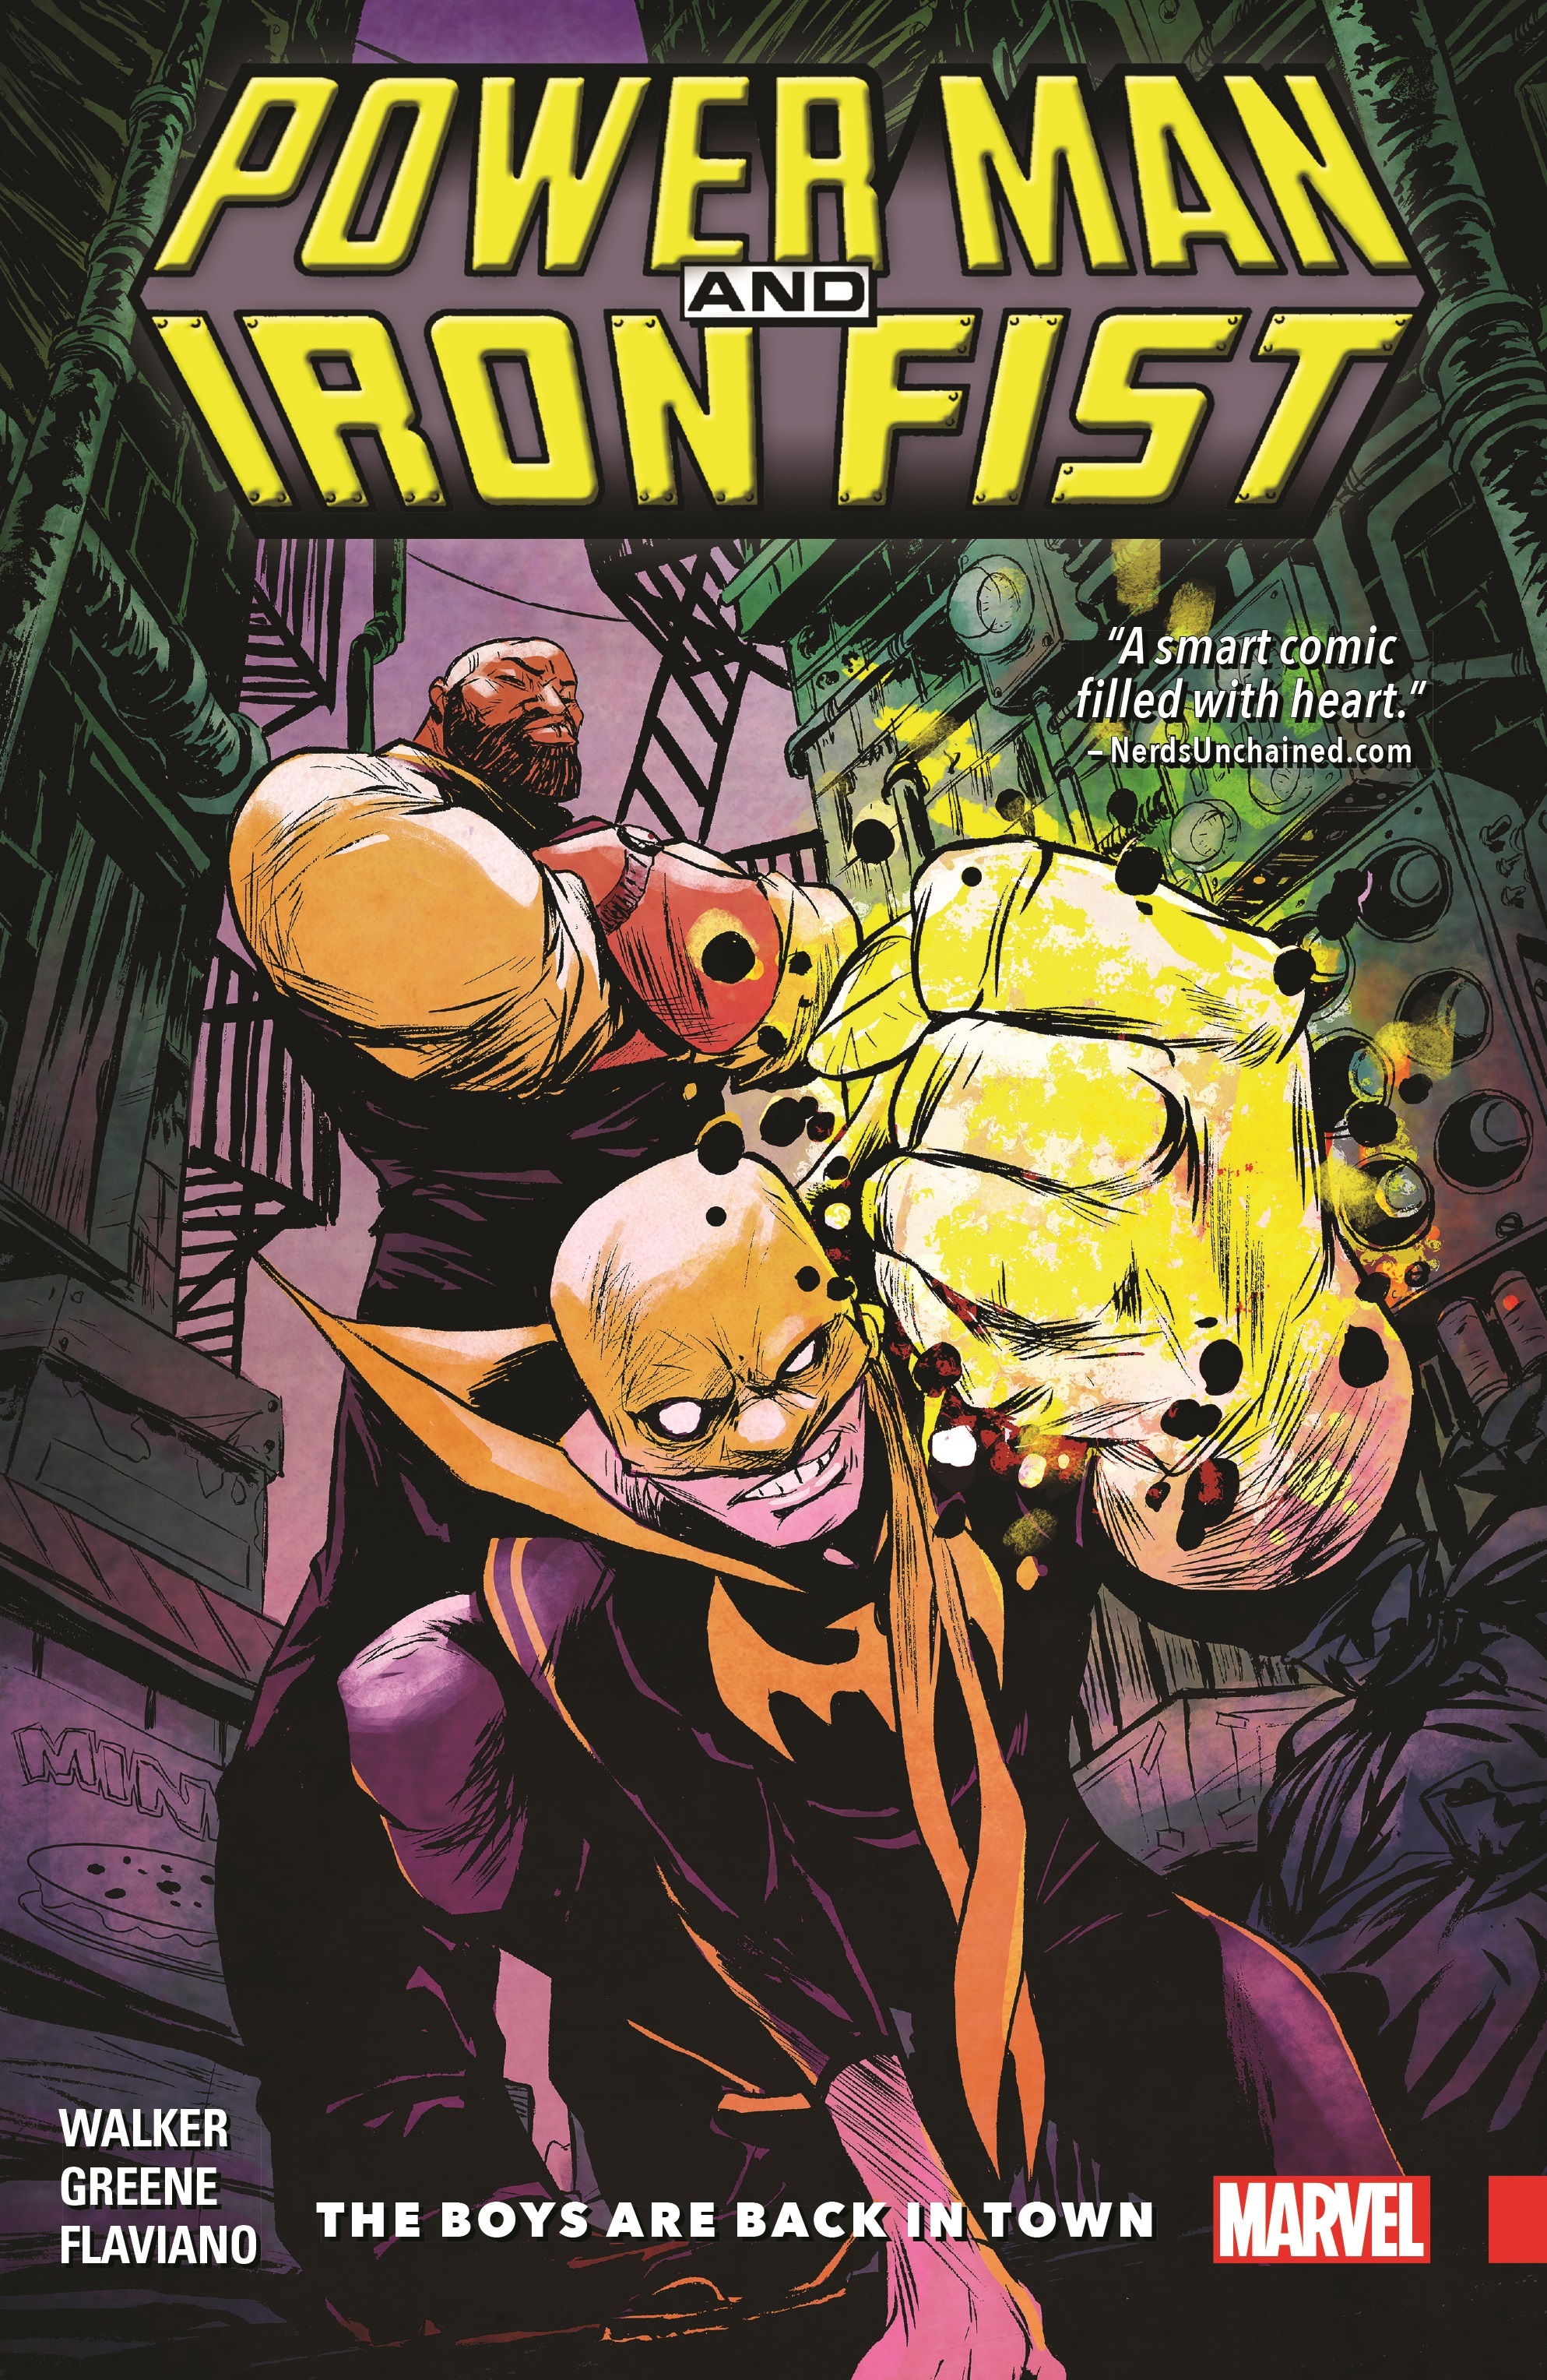 Power Man and Iron Fist Vol. 1: The Boys Are Back in Town (Trade Paperback)